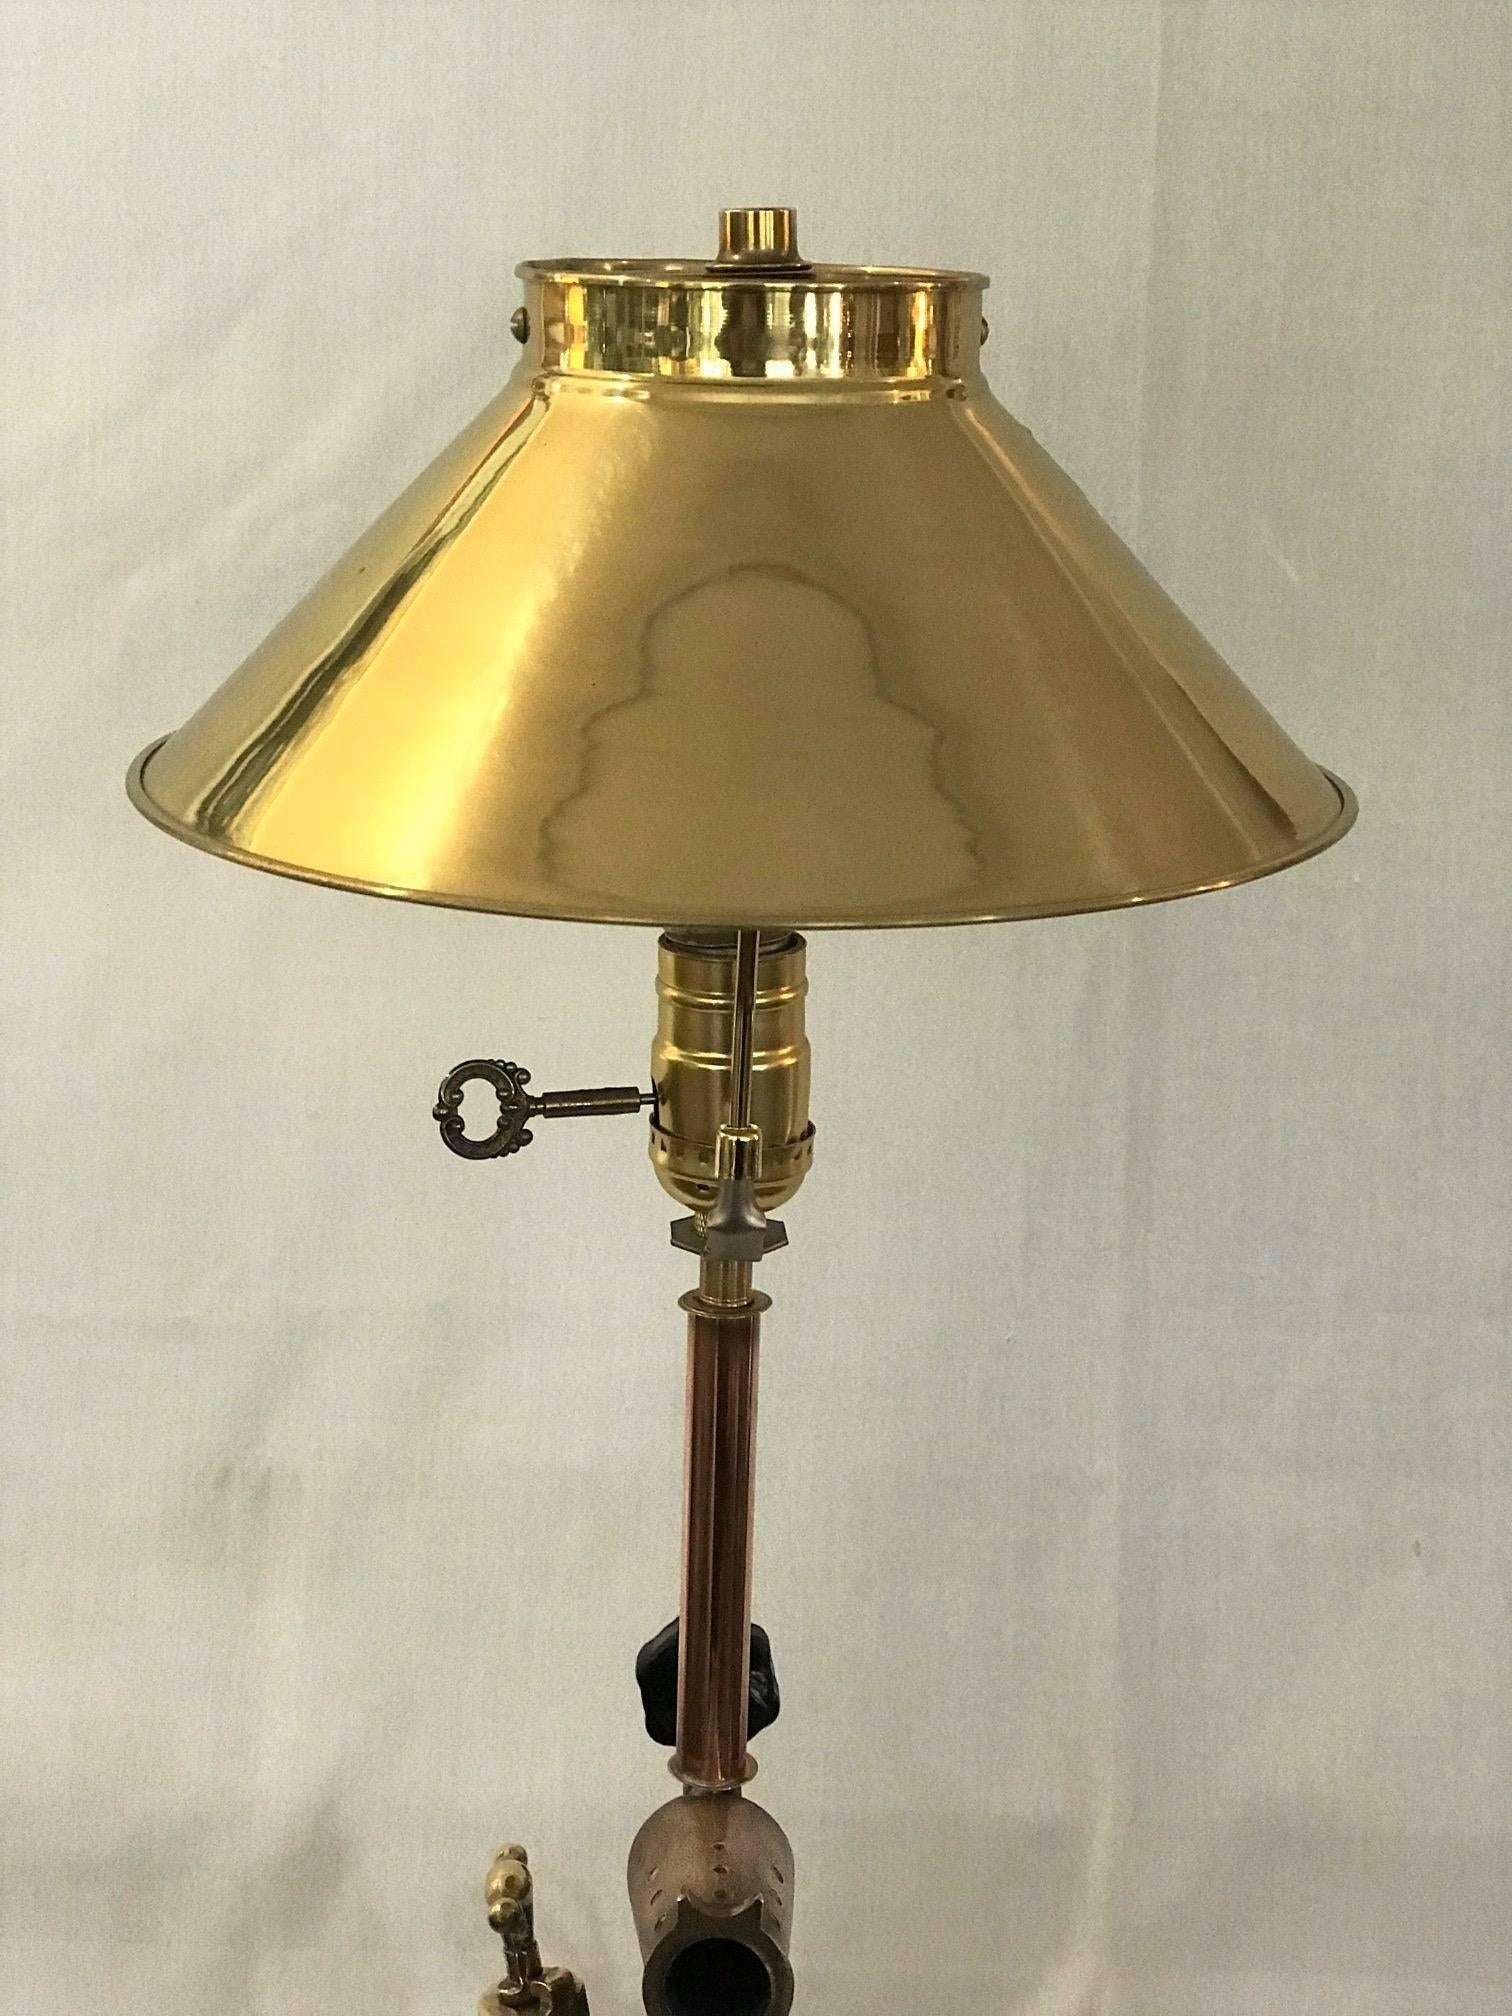 Sale! Sale!  Just in Time for The Holiday and Man in Your Life!  Man Cave Early 1900's blow torch lamp conversion polished brass parts and shade. For that special person in your life. This is a fantastic original piece of art that would look great